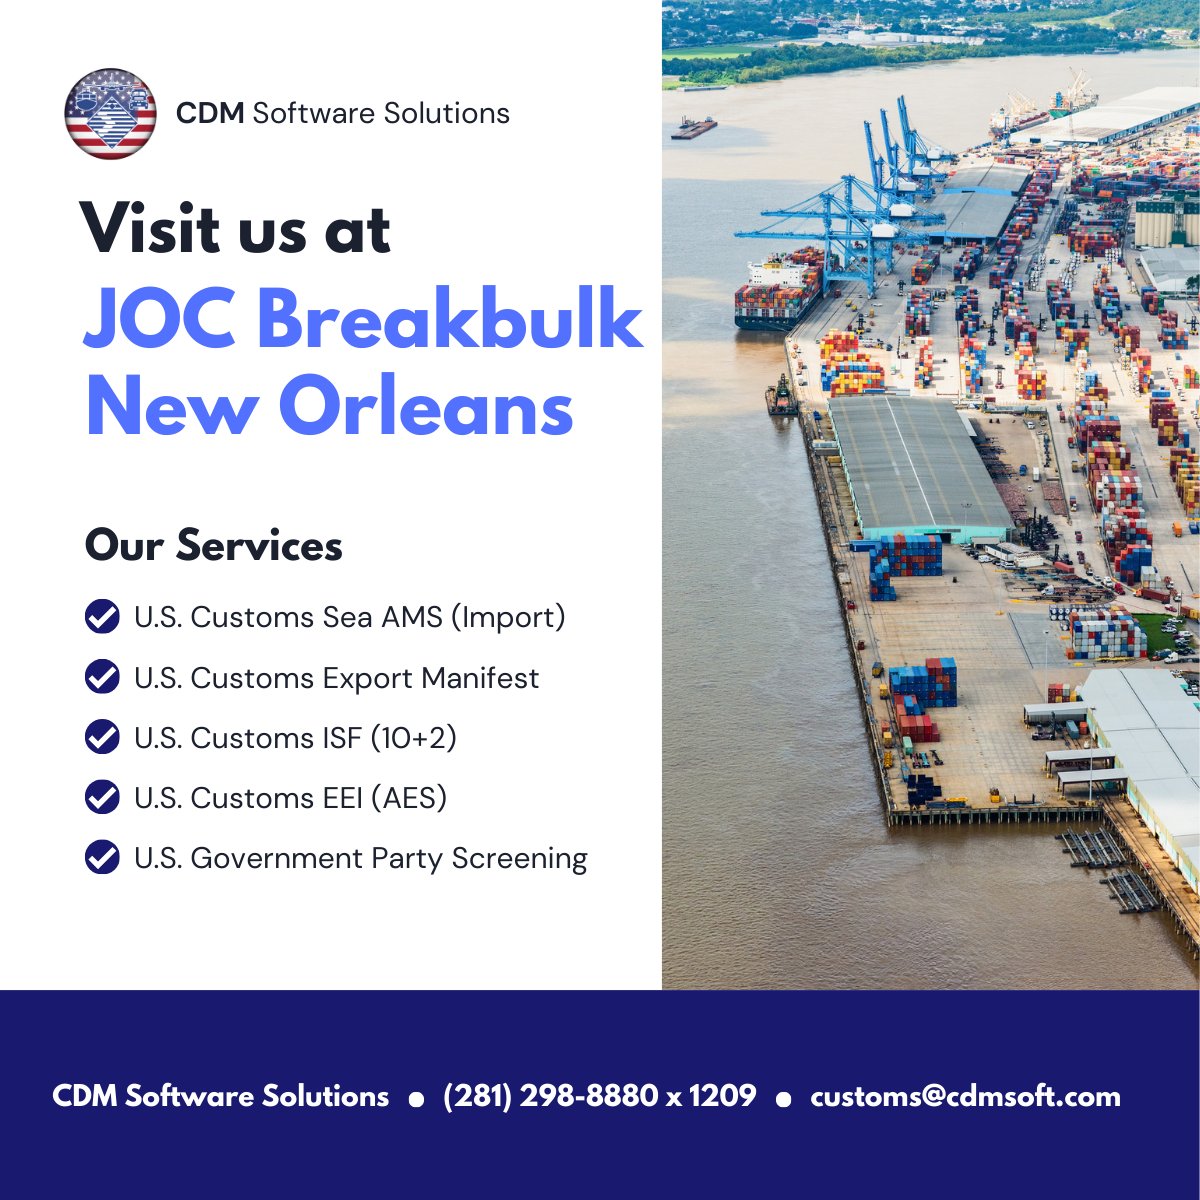 It's another beautiful day in New Orleans at JOC #Breakbulk24. Come give us a visit!

#export #import #freightforwarder #freight #seafreight #supplychain